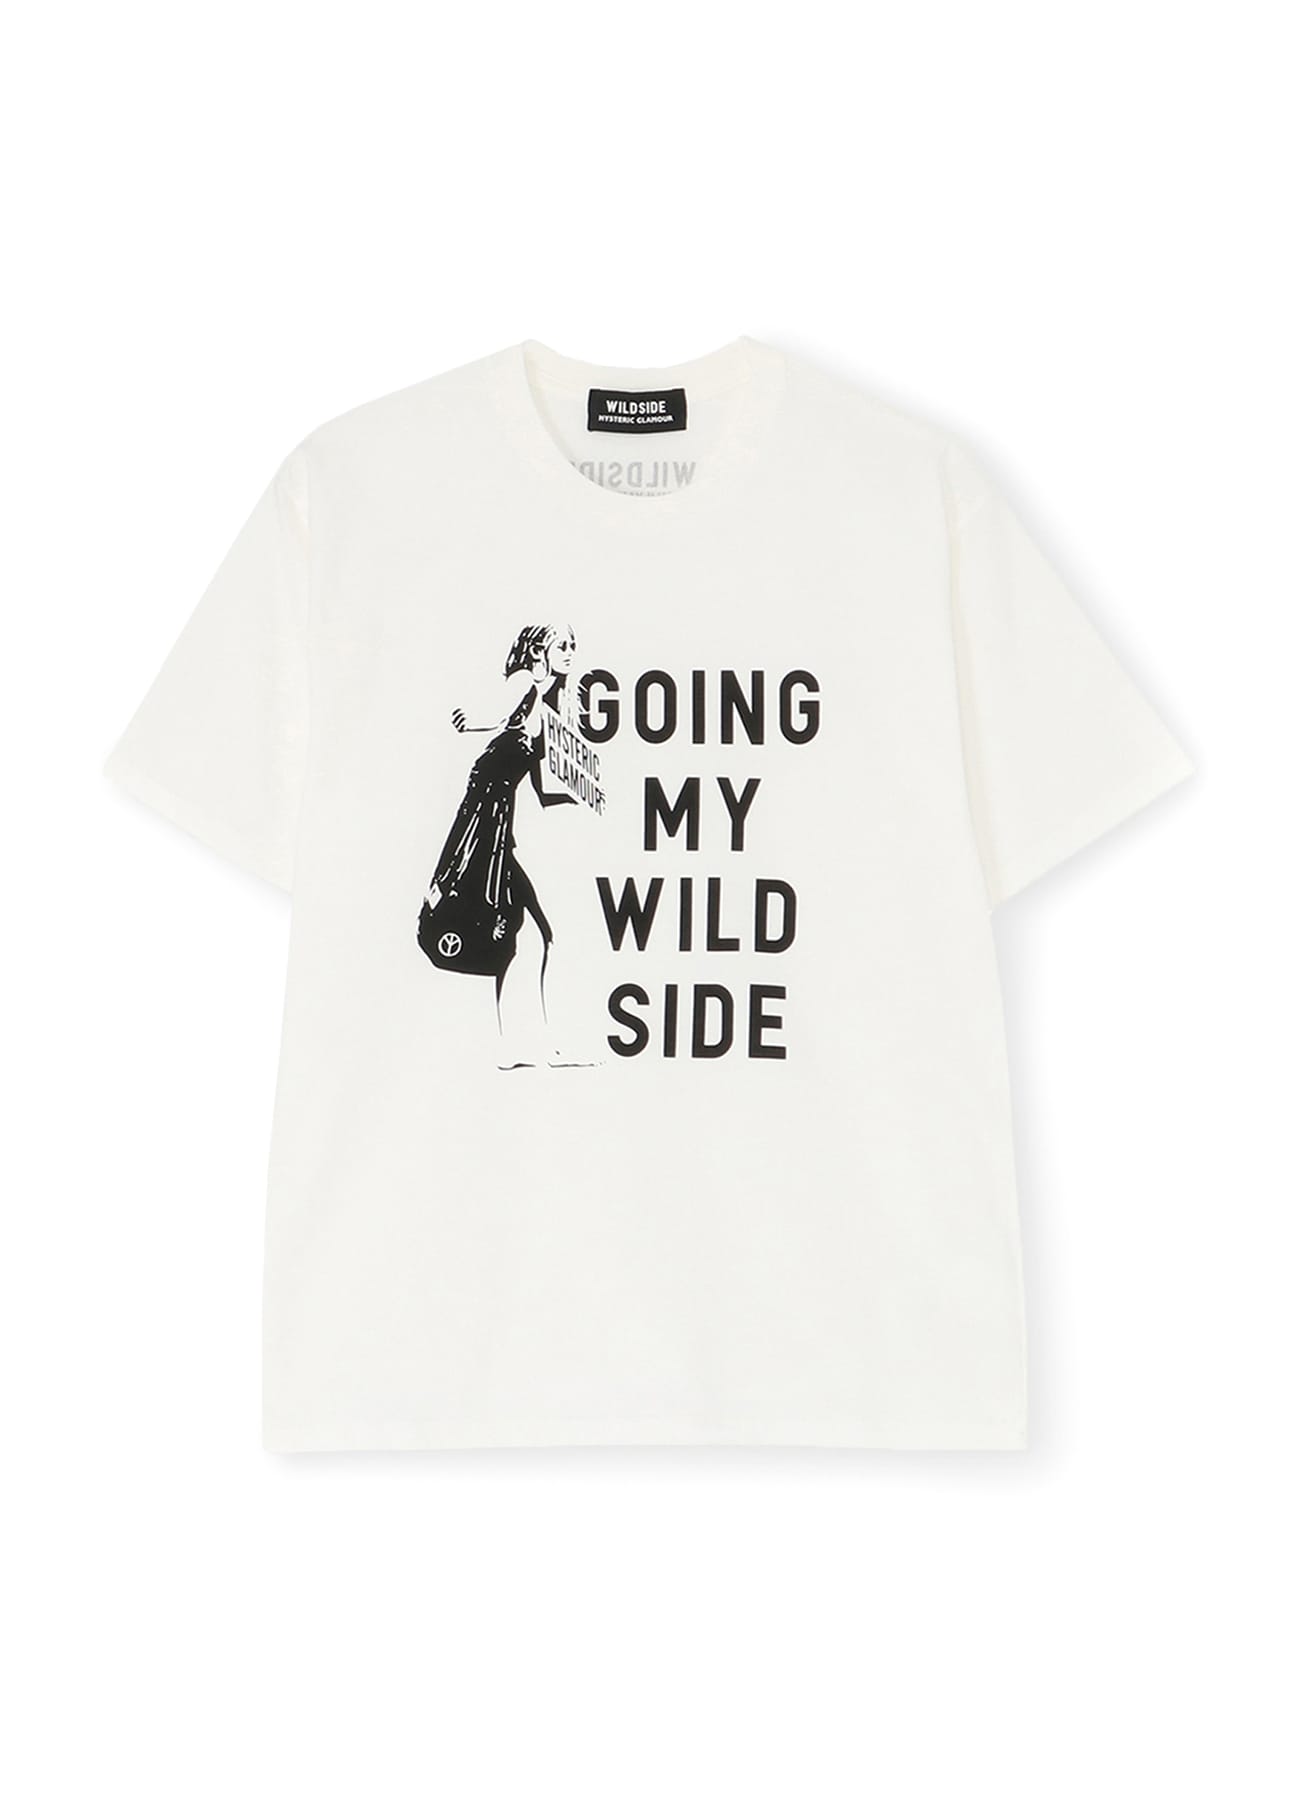 WILDSIDE × HYSTERIC GLAMOUR "GOING MY WILDSIDE" T-shirt